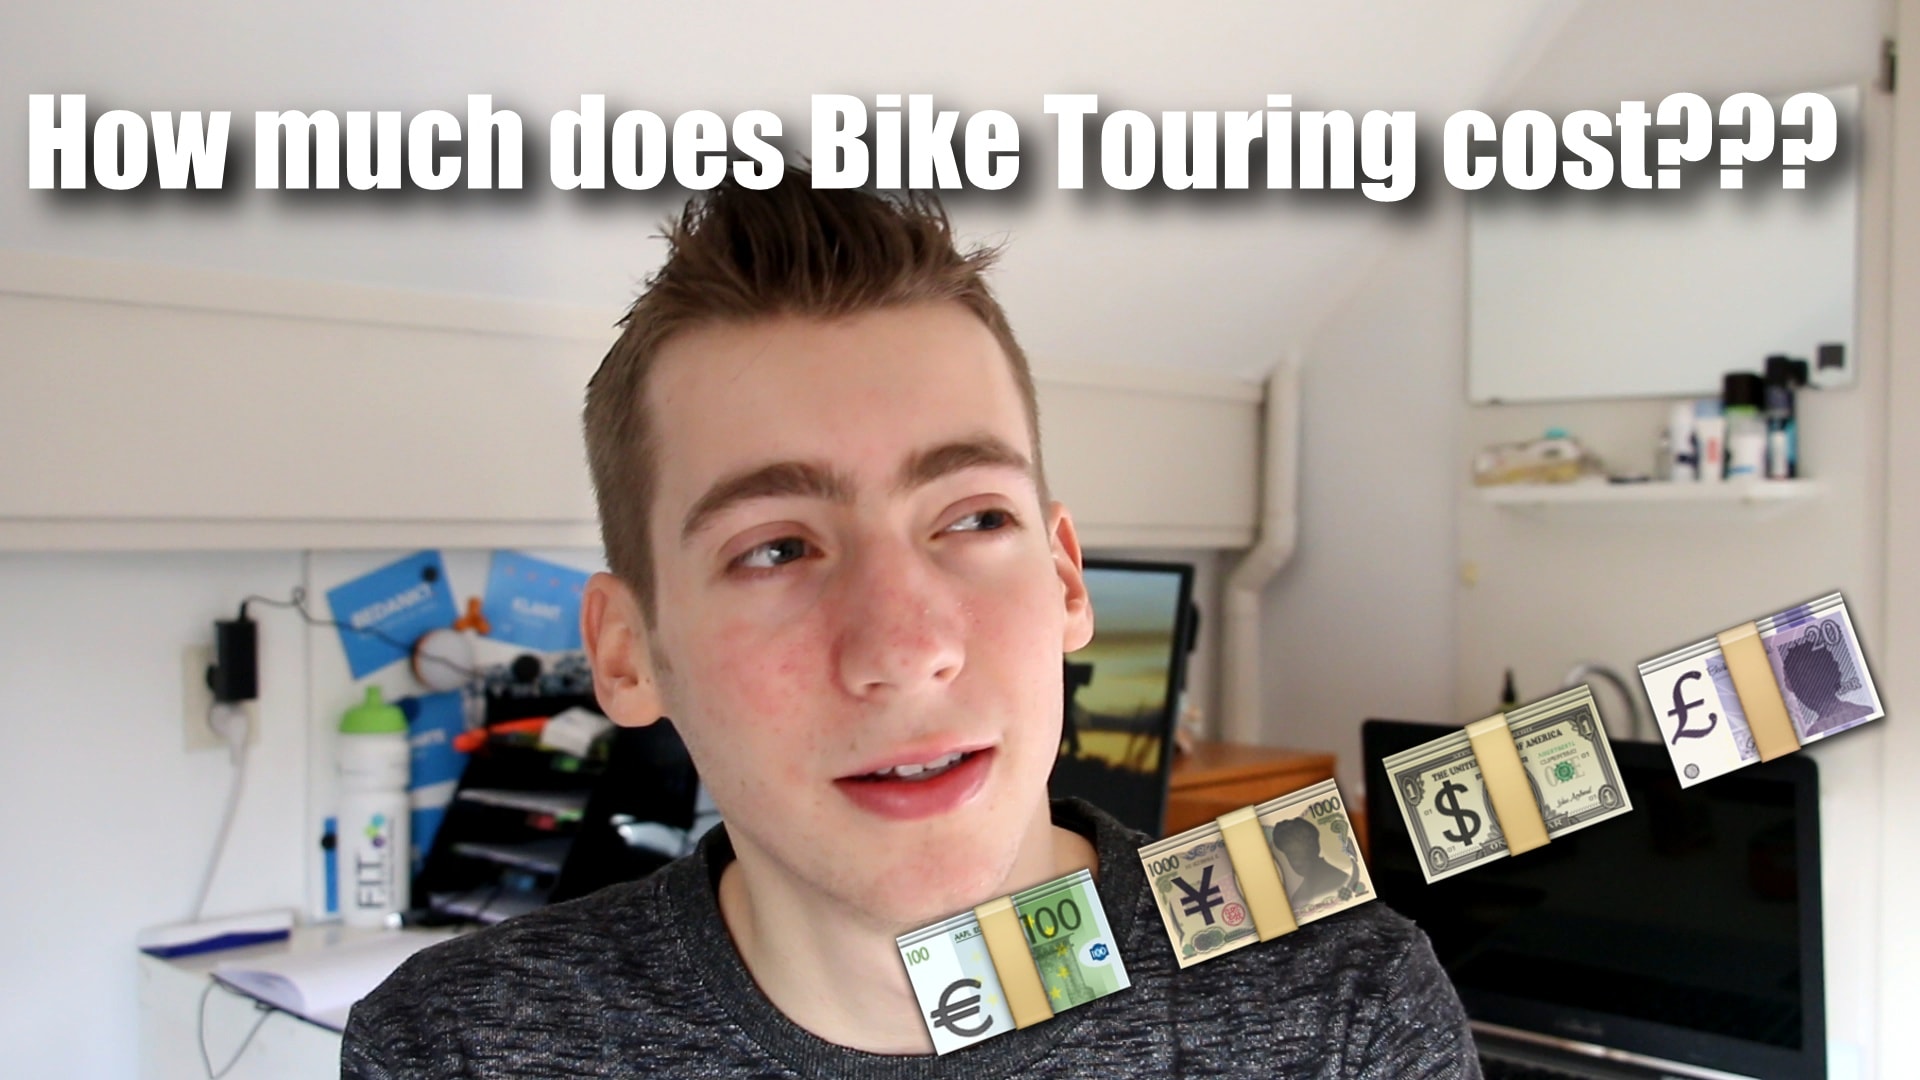 What Does Bike Touring Cost?